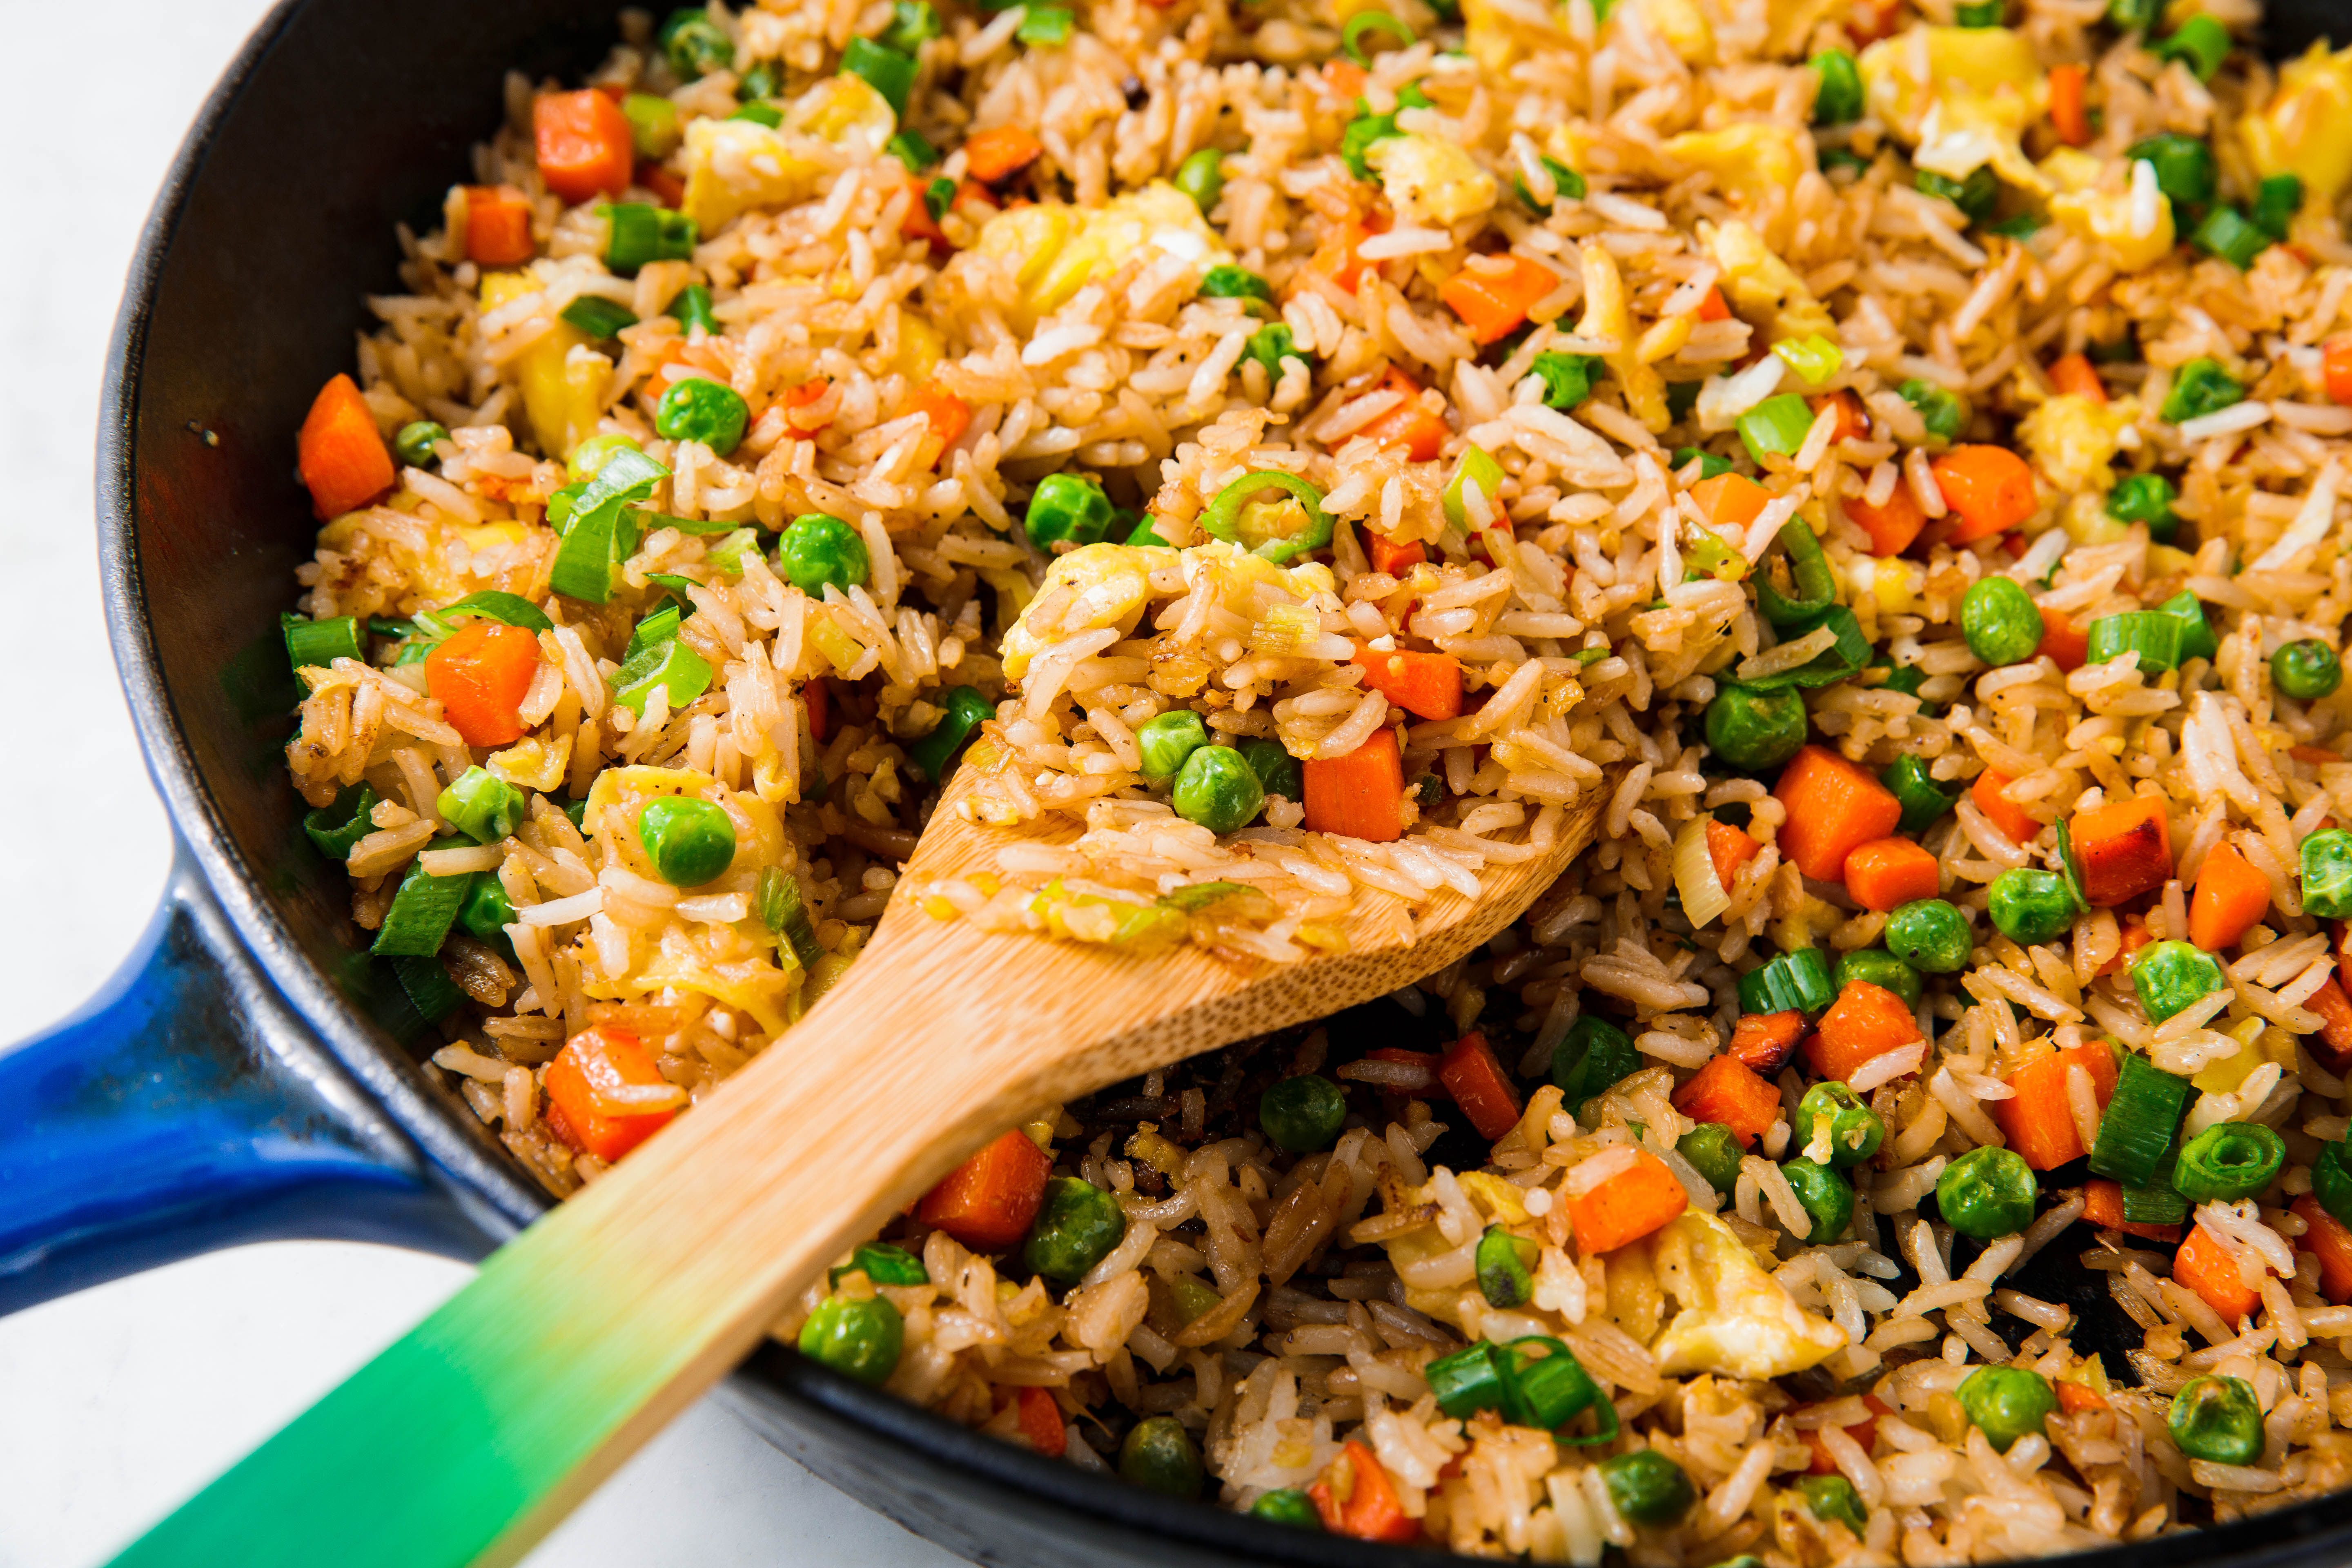 Best Fried Rice Recipe - How To Make Perfect Fried Rice image